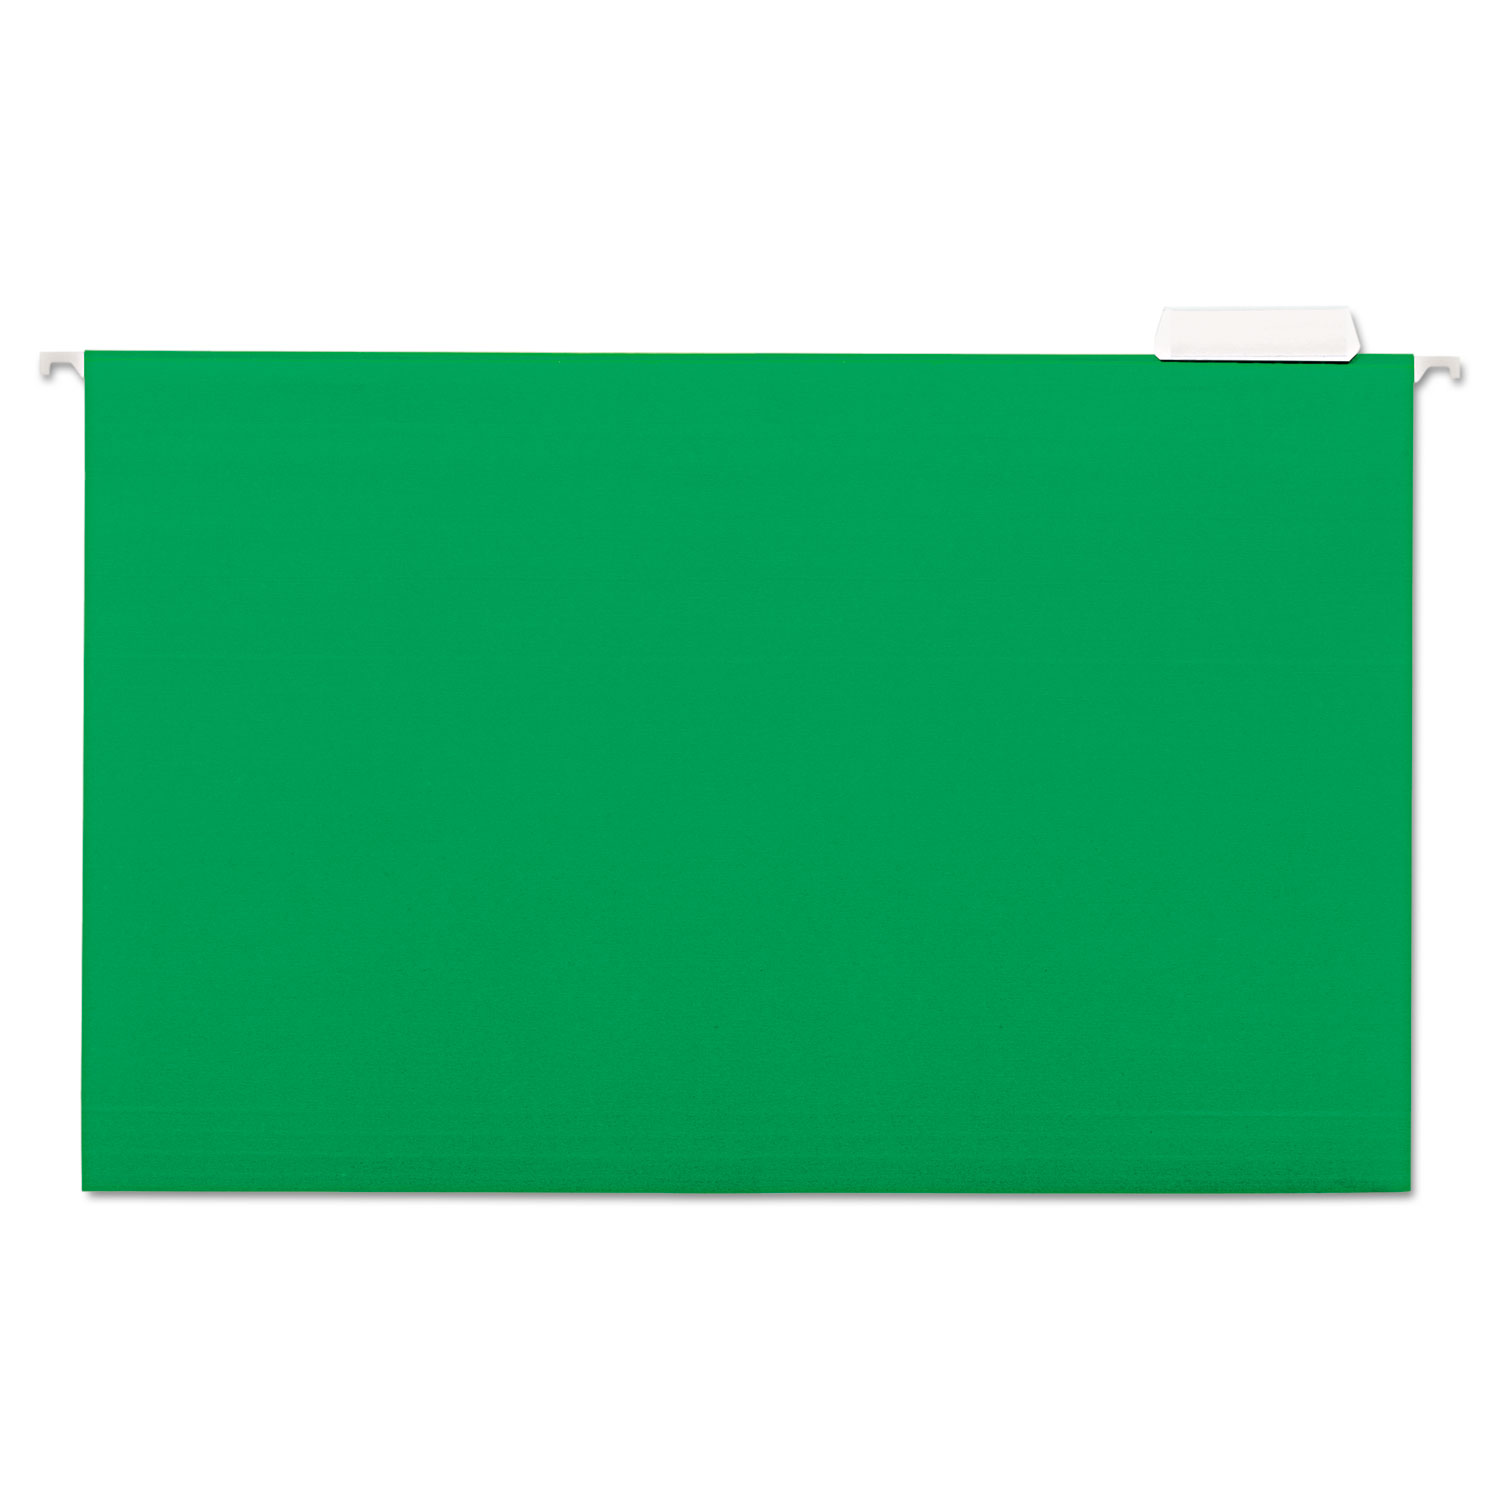  Universal UNV14217EE Deluxe Bright Color Hanging File Folders, Legal Size, 1/5-Cut Tab, Bright Green, 25/Box (UNV14217) 